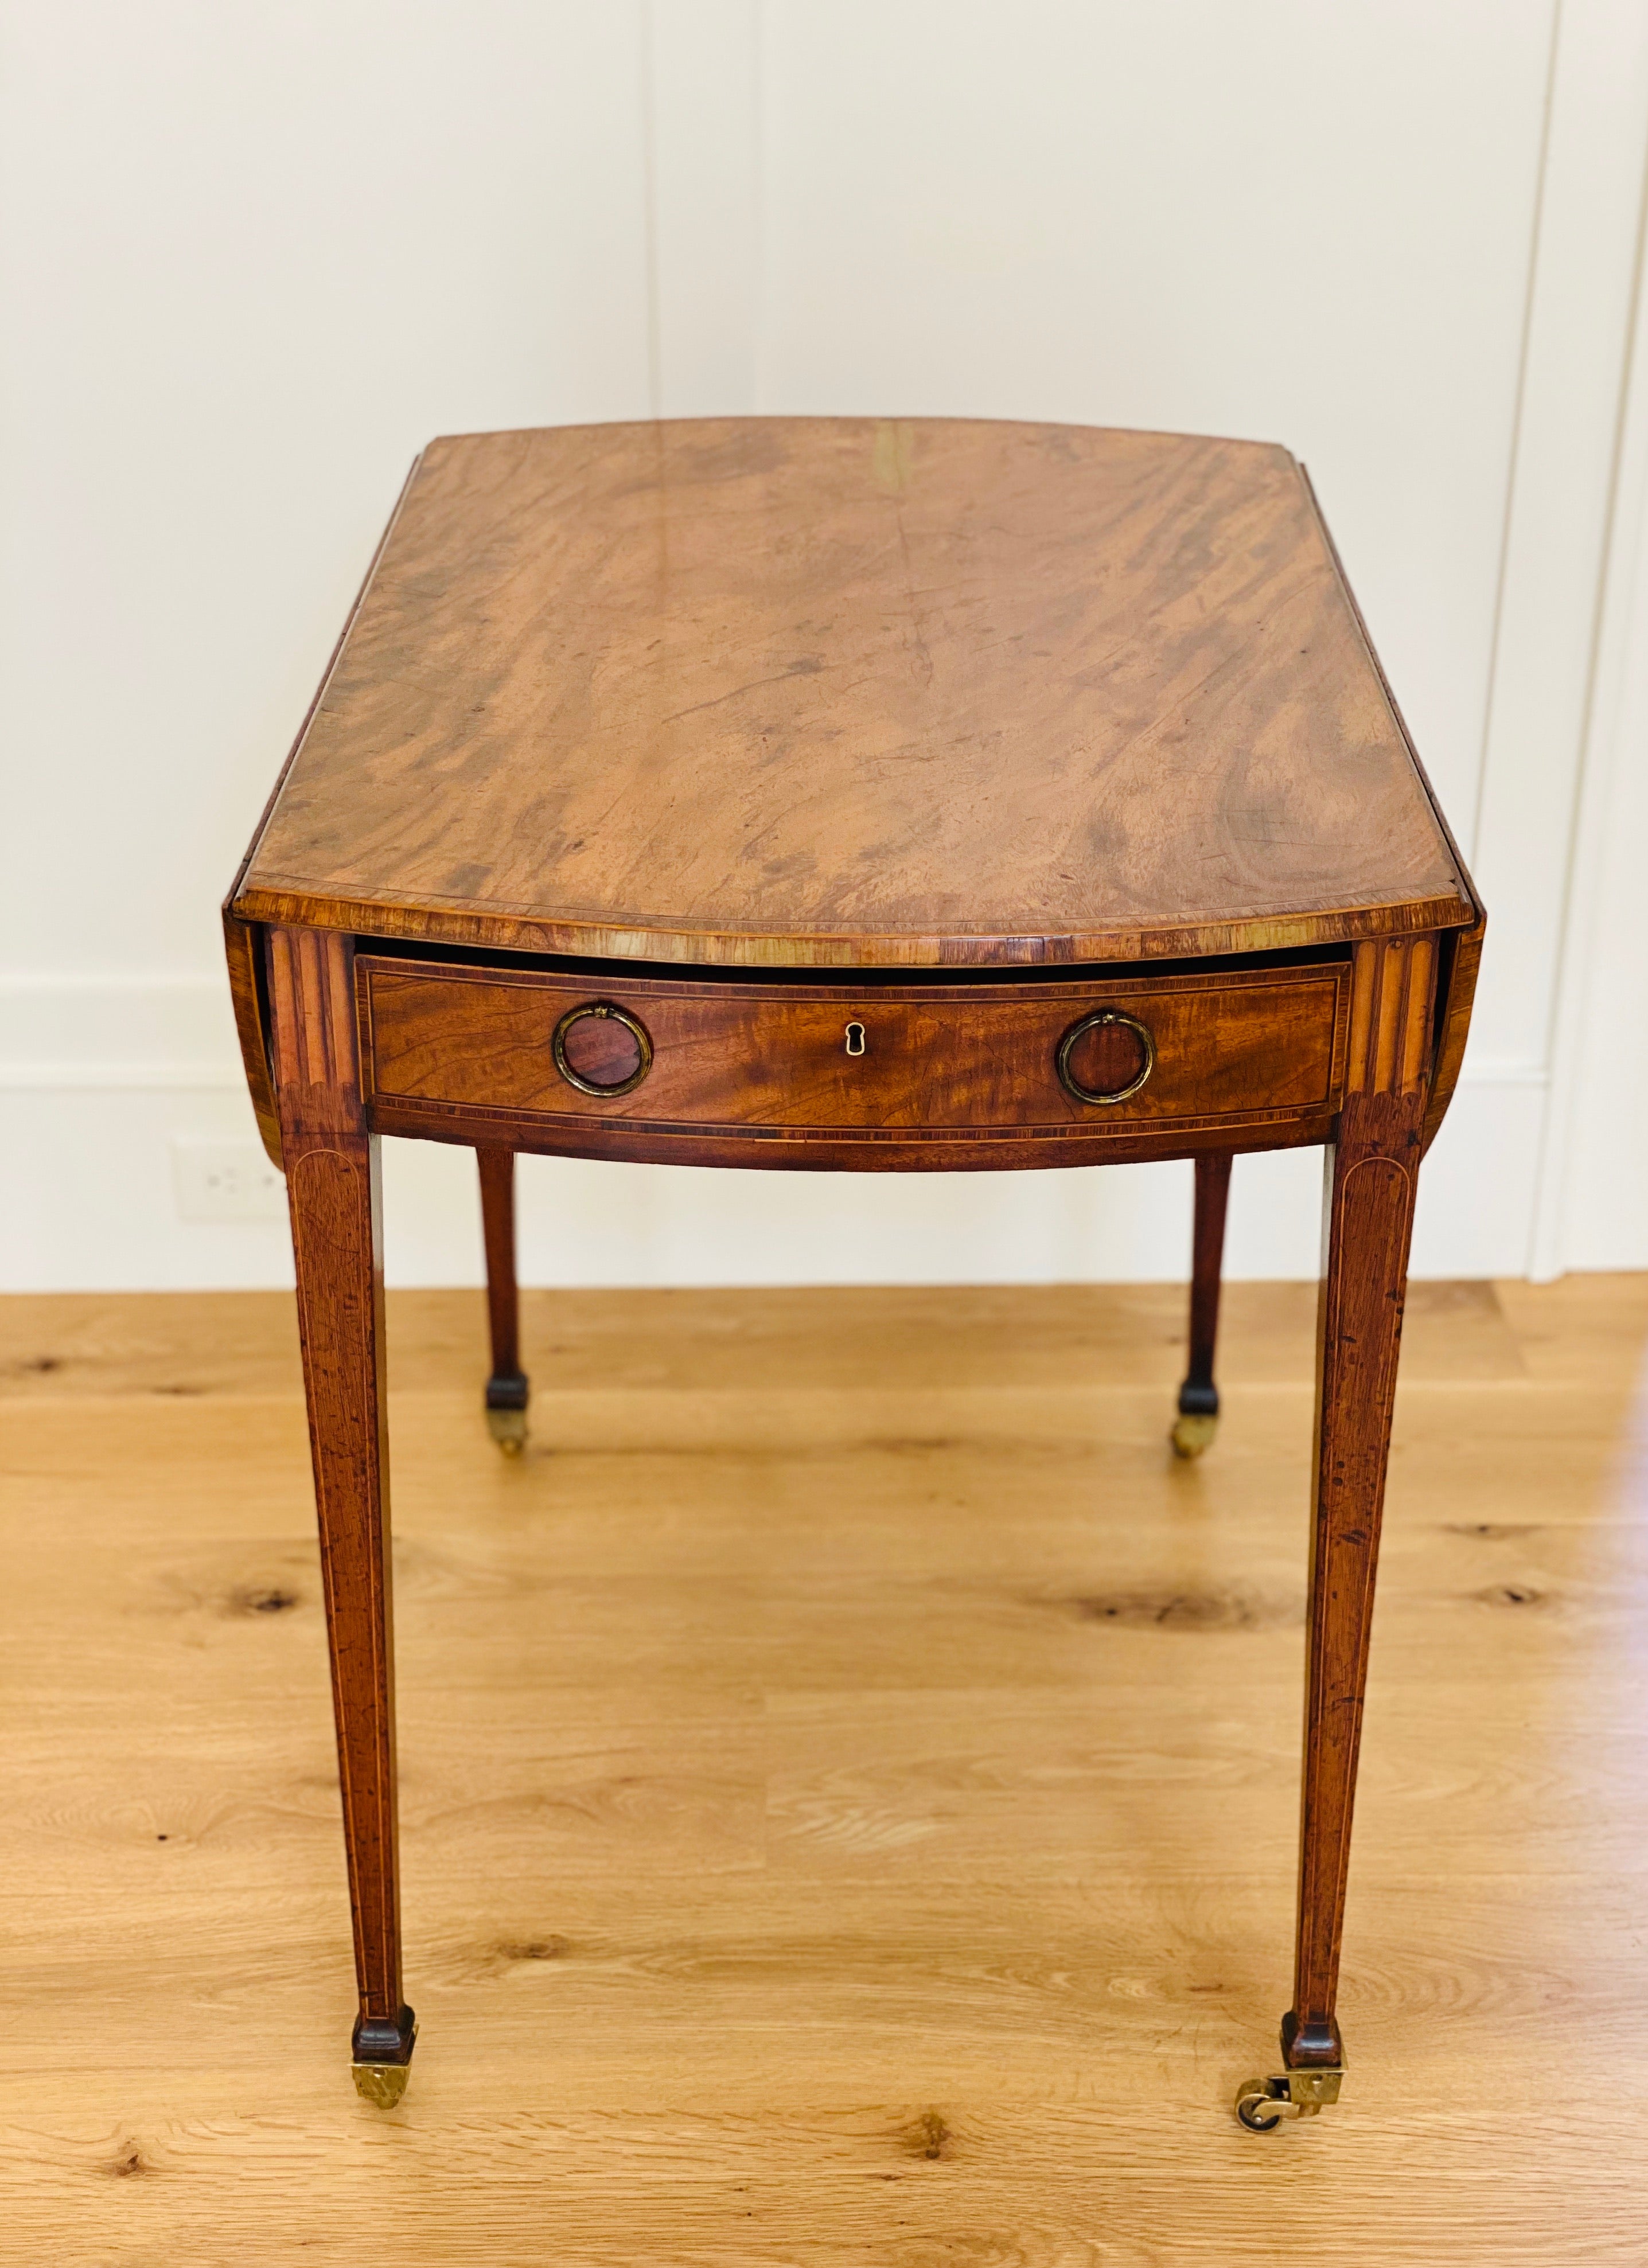 Antique George III Inlaid Pembroke Table from the Estate of Mario Buatta